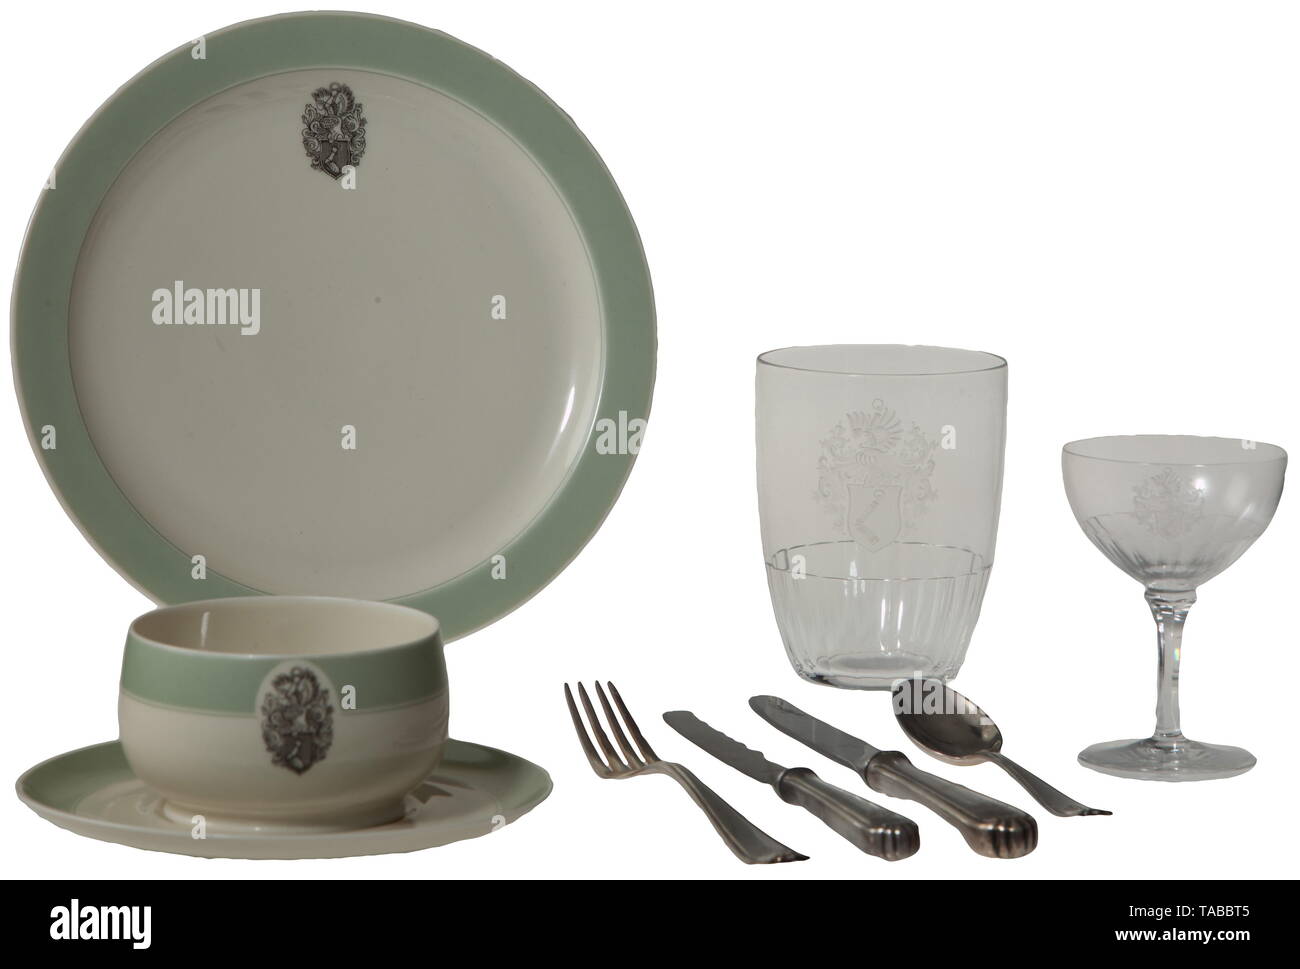 Hermann Göring - a galley set from his personal airplane, a JU 290 Originally taken by a U.S. Army officer from the airfield at Ainring near Obersalzberg. Contents of box consist of 4 plates, 4 cups, 4 drinking glasses (one with crack), 2 wine glasses, 4 forks, 4 spoons, 4 knives, and 3 fruit knives, all with Göring crest. Three of the knives with replaced Henckels blades. All pieces stored in wooden box with compartments and inserts to protect contents during transport. Silver plated flatware marked on reverse 'BSF90'. China plates marked on the reverse with a Bavarian cro, Editorial-Use-Only Stock Photo